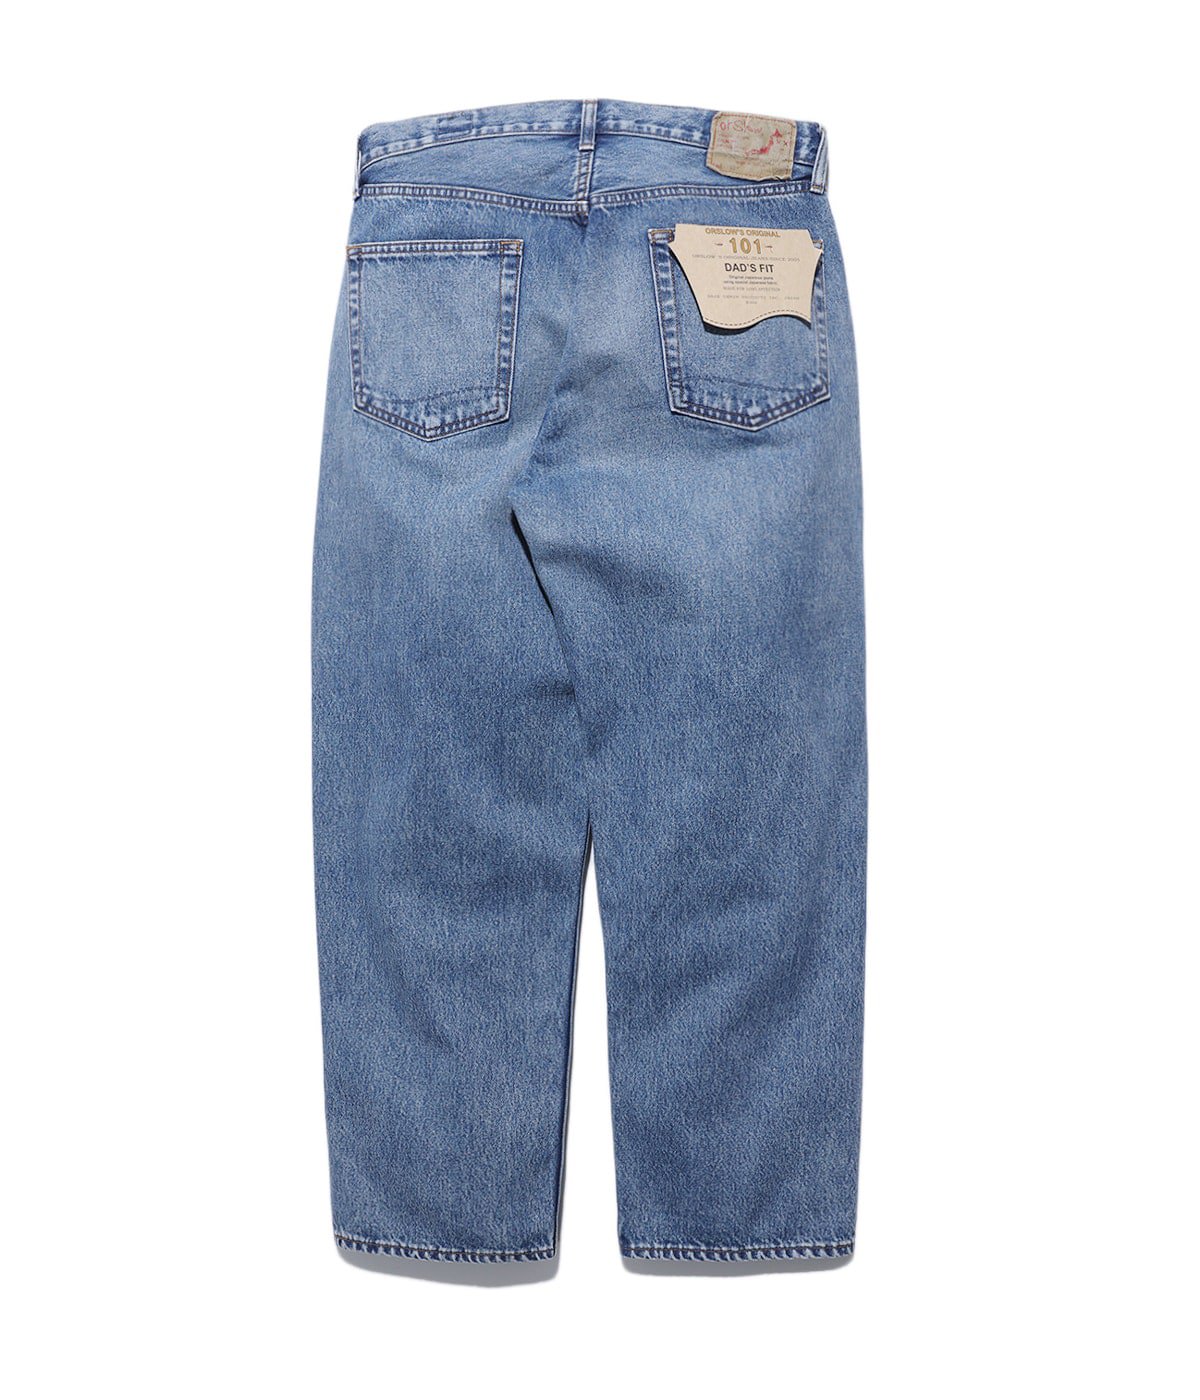 【ONLY ARK】別注 DAD’S FIT DENIM PANTS USED